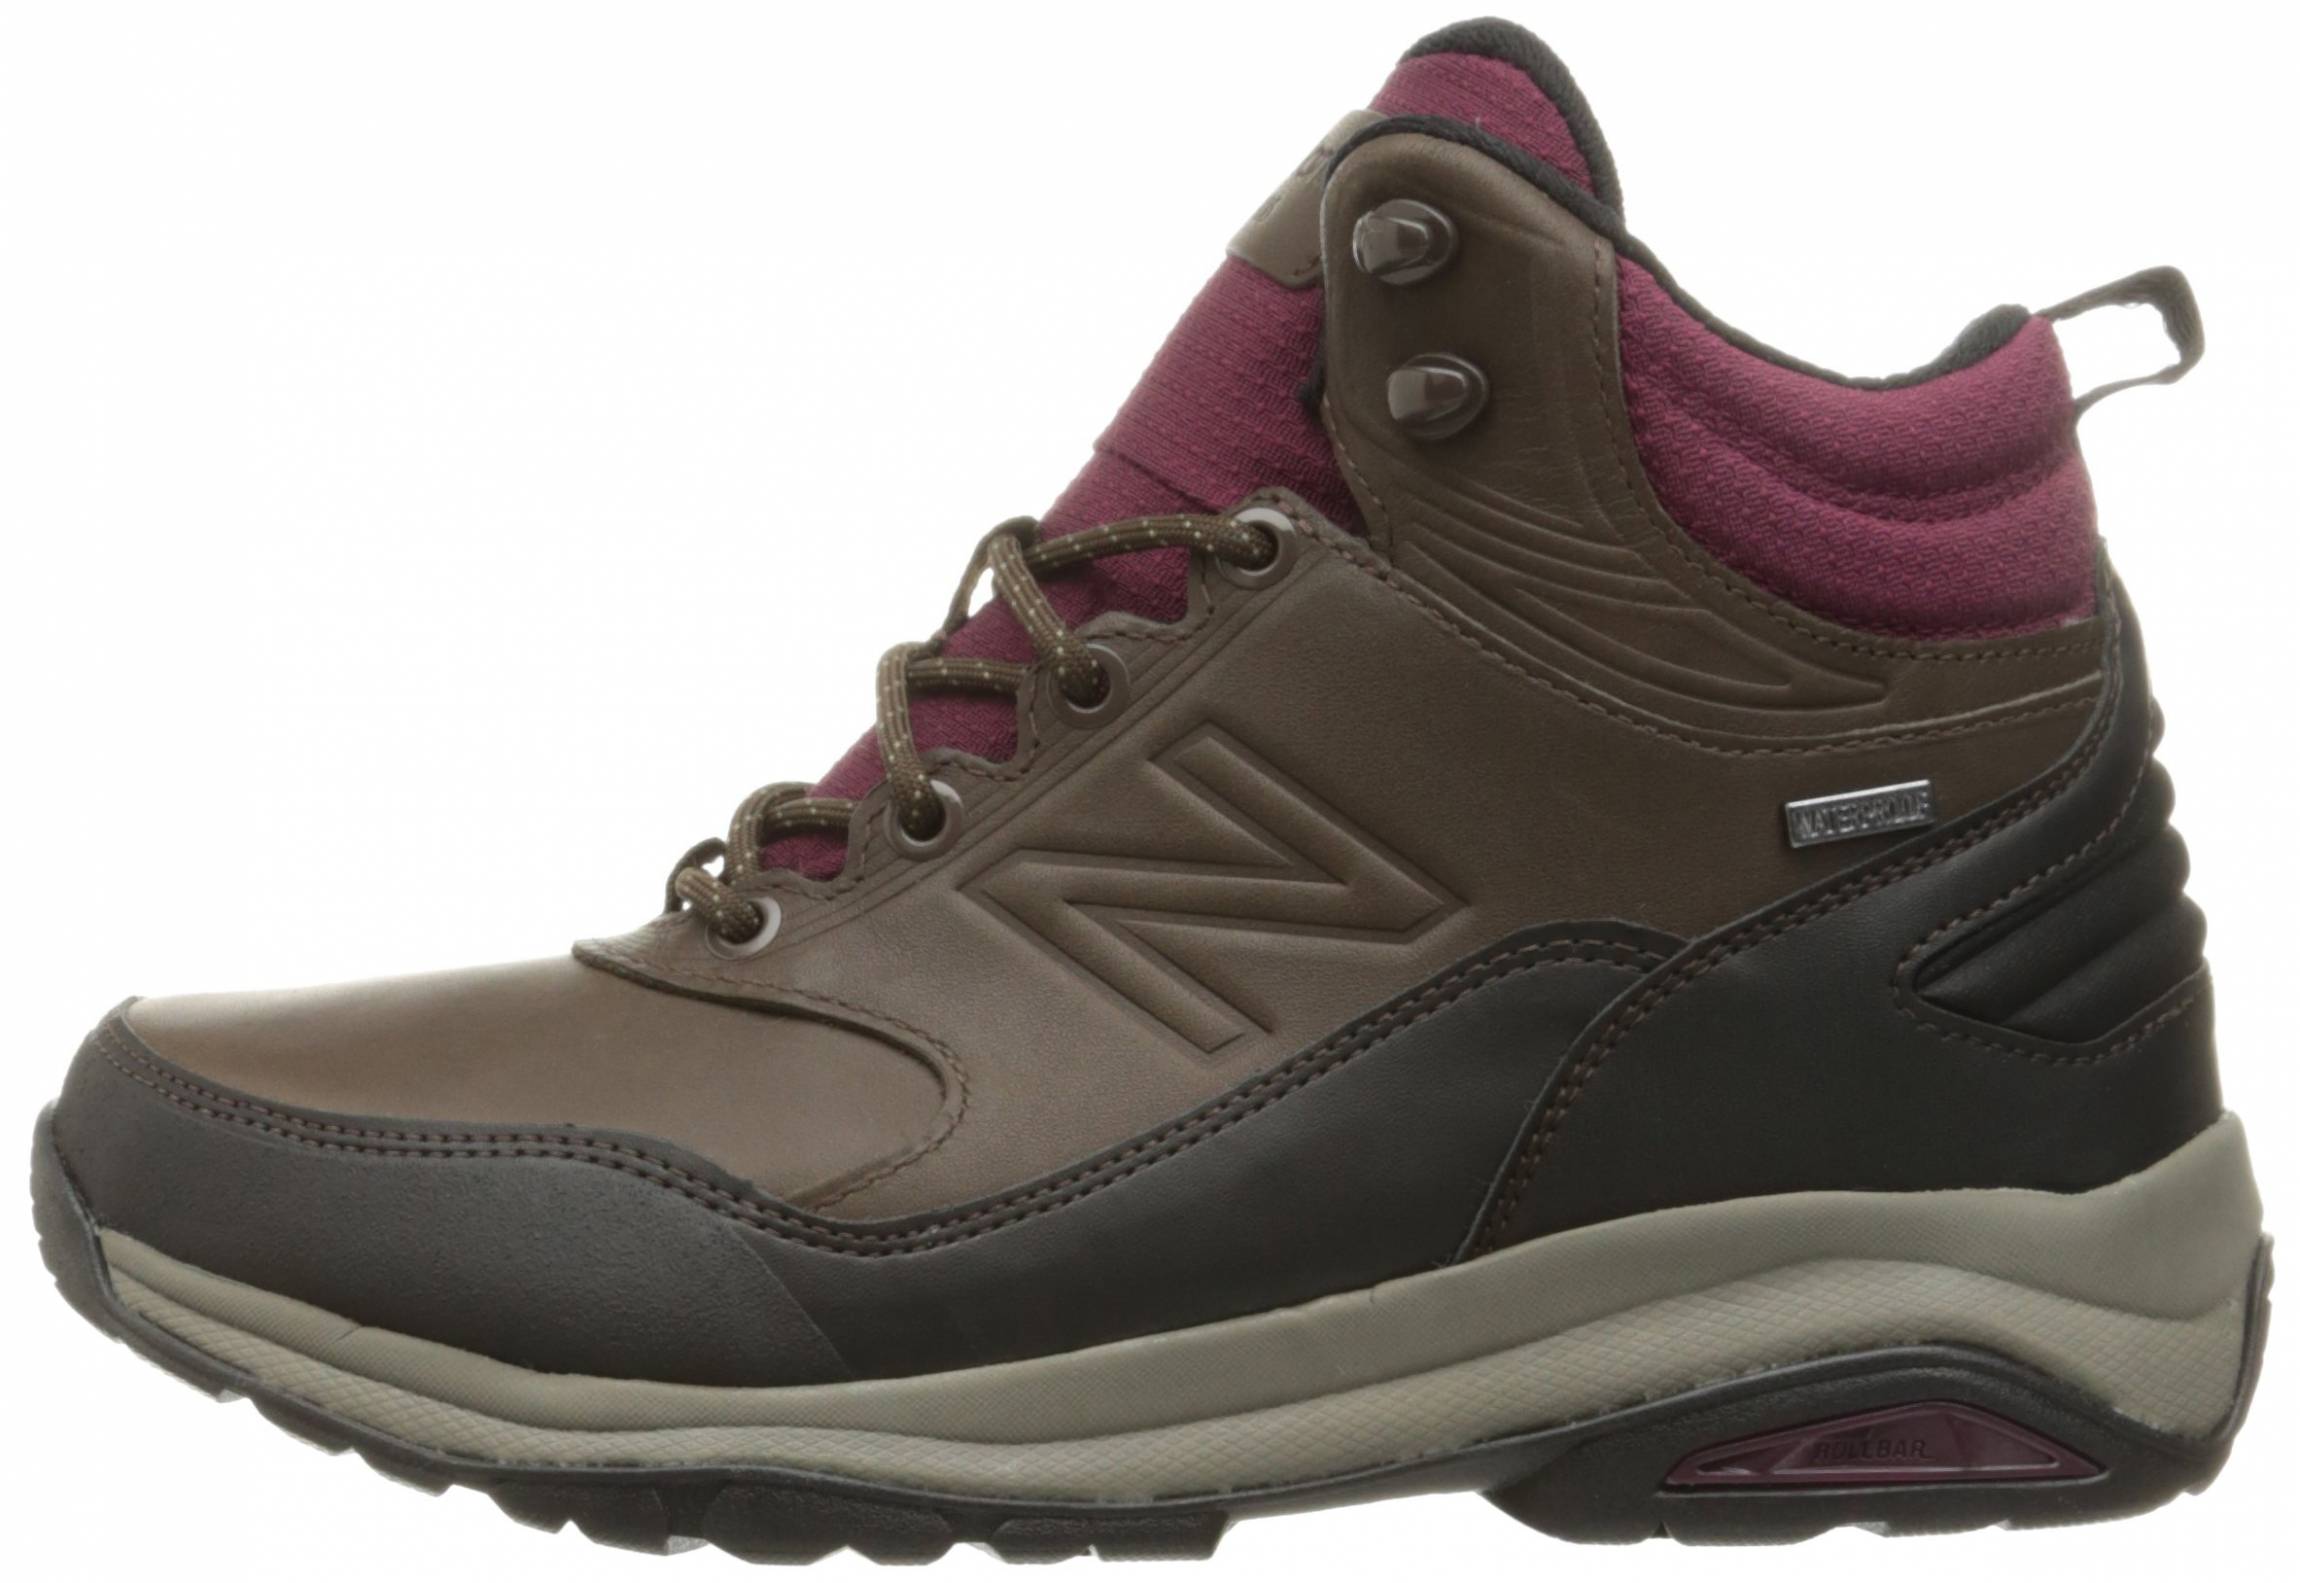 New Balance hiking boots (1 models in 